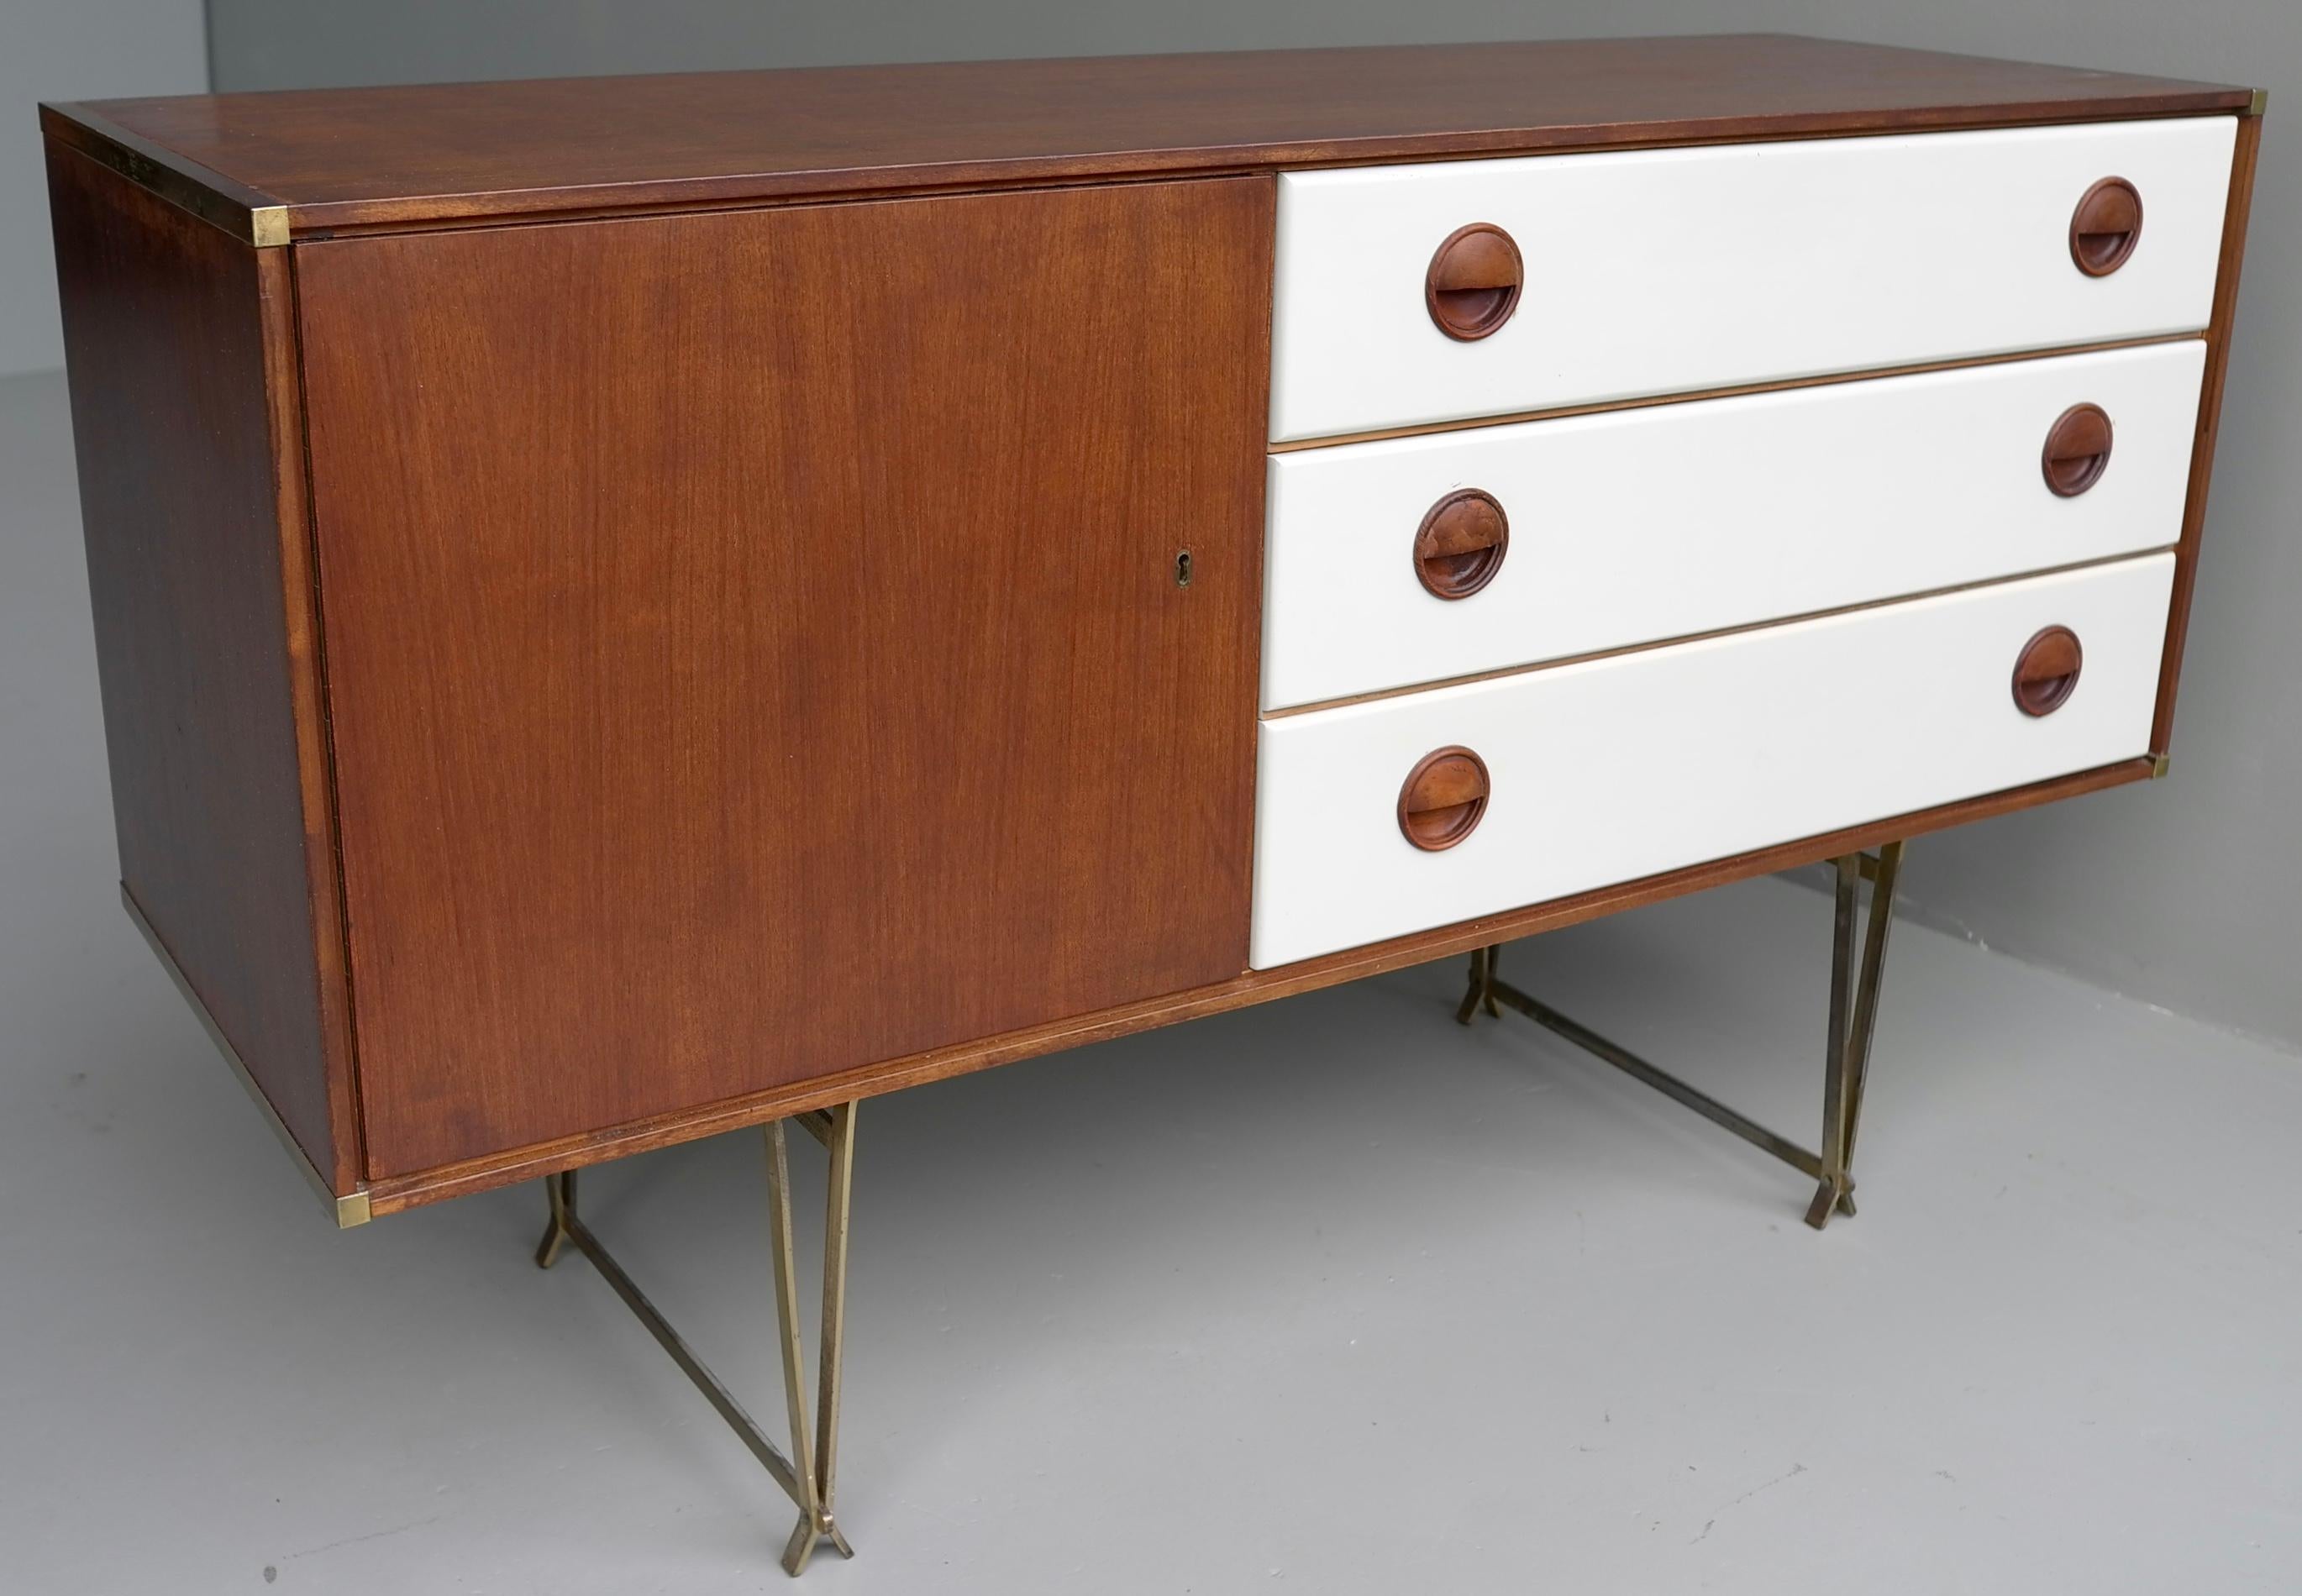 Mid-20th Century Fristho Sideboard by Wim Crouwel in Teak and White, with Fine Brass Leggs, 1954